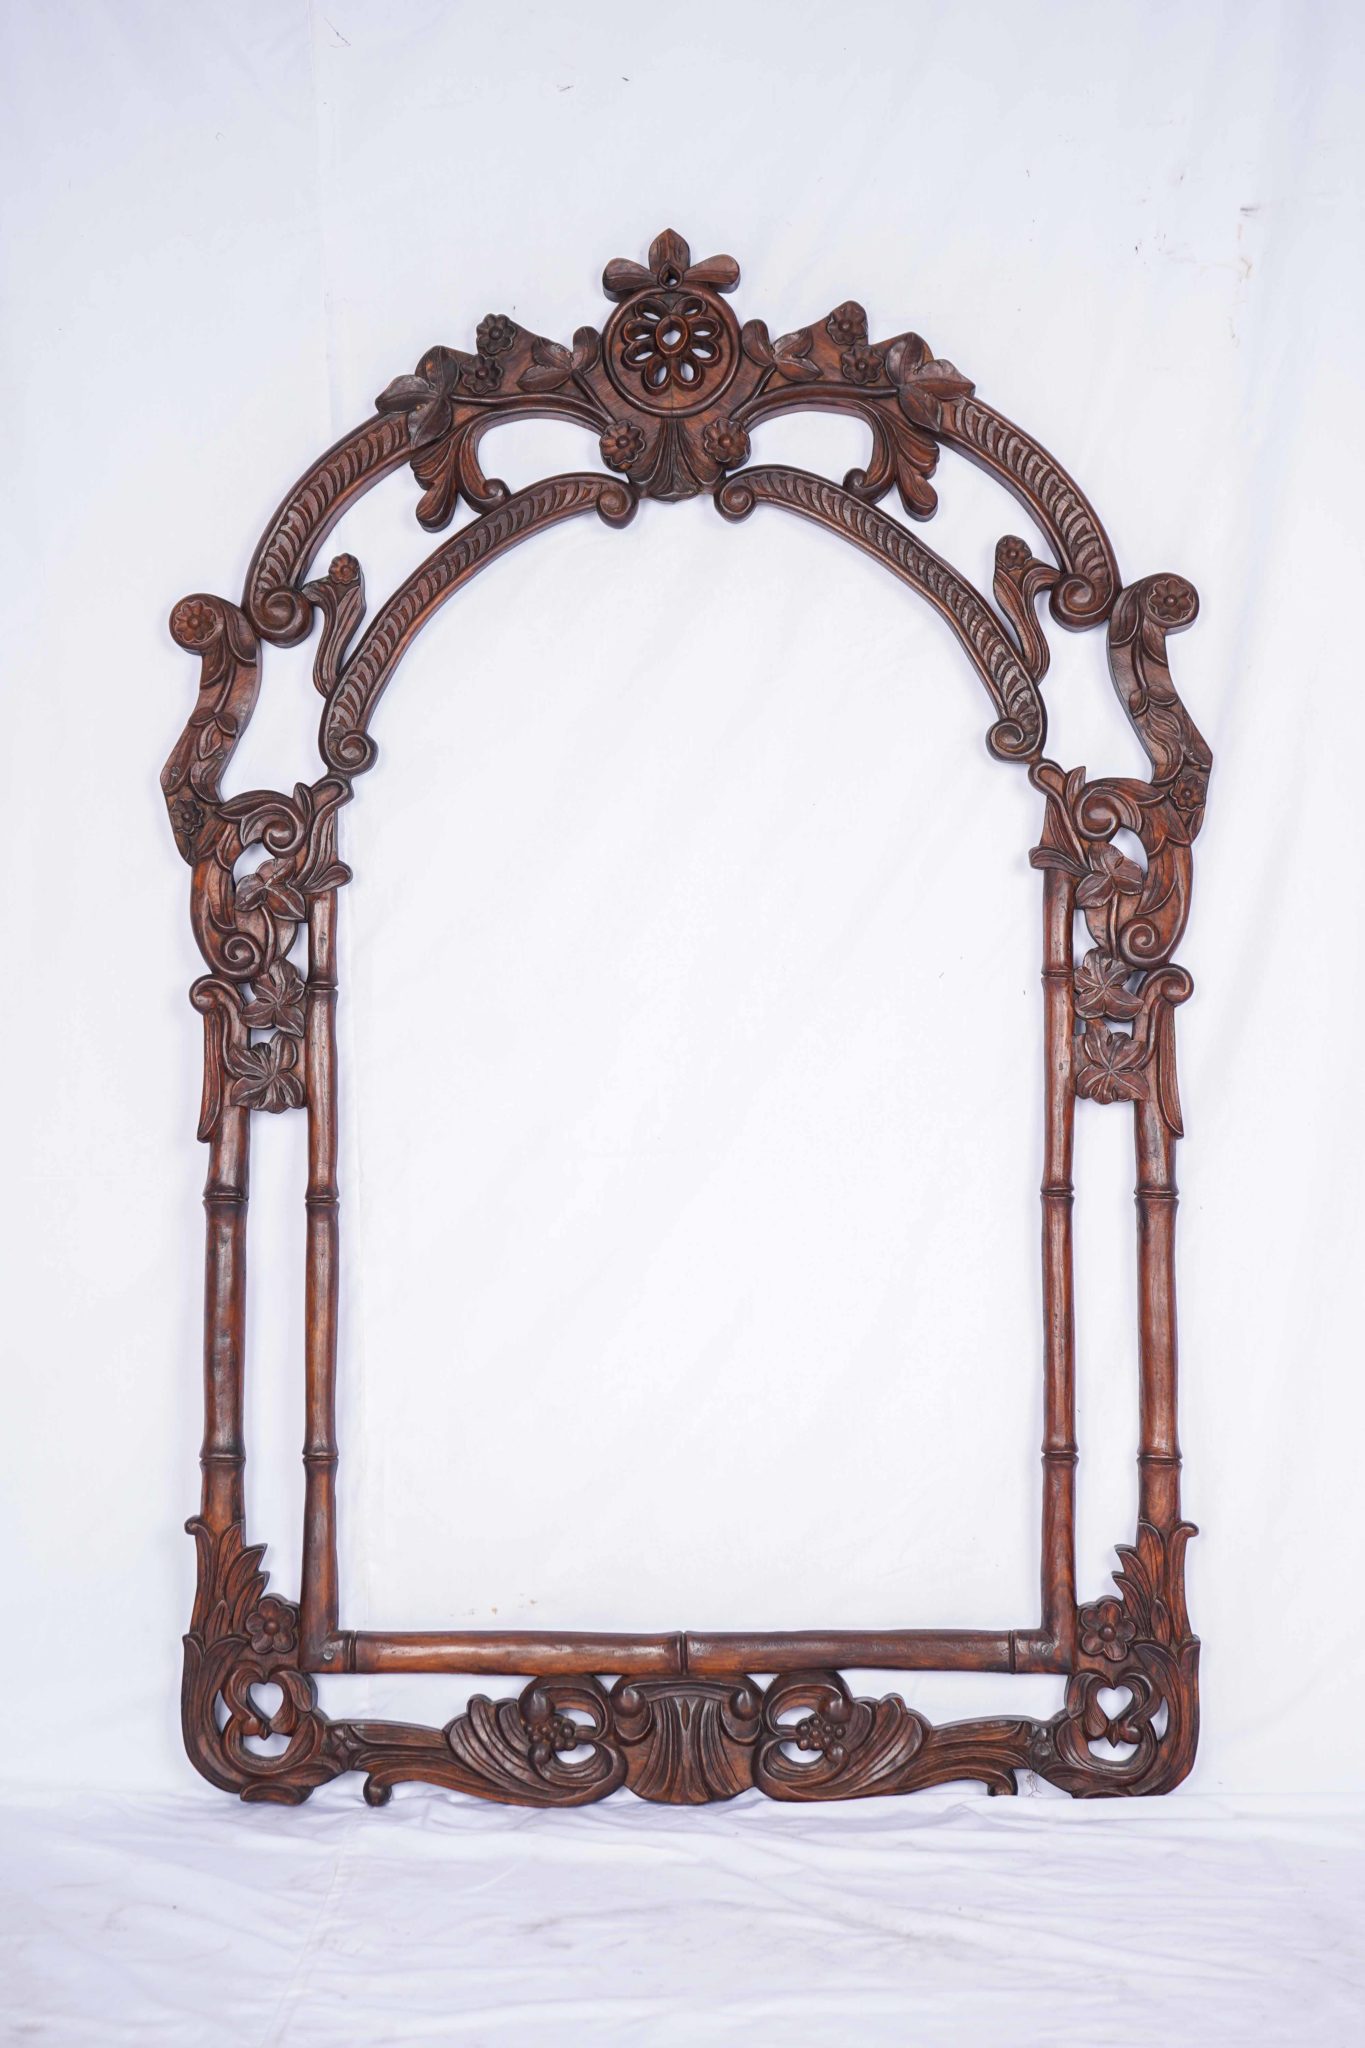 Clearance Sale: Wooden carved frame, hand made furniture, Indian design - Siam Sawadee